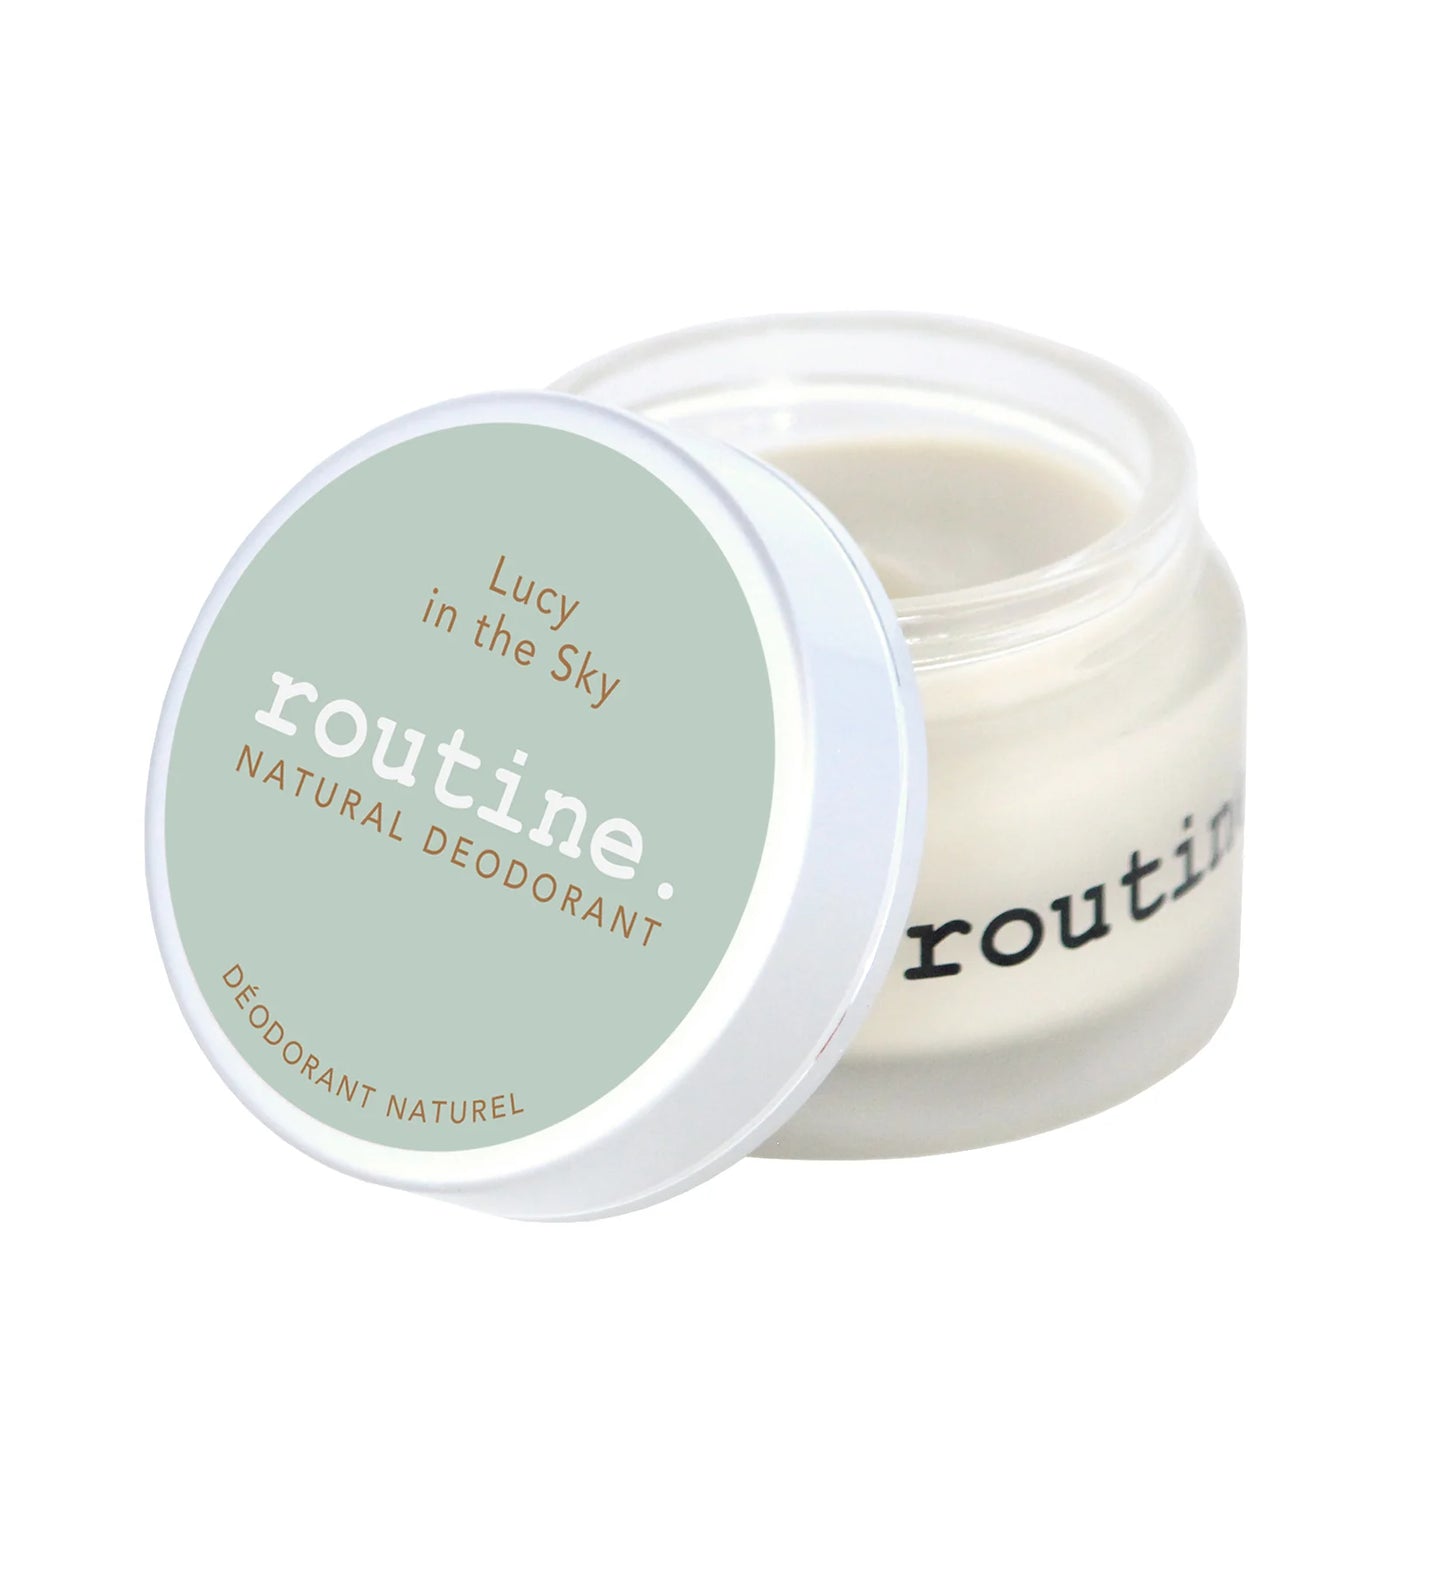 Routine Deodorant- Lucy in the Sky (vegan: no beeswax)